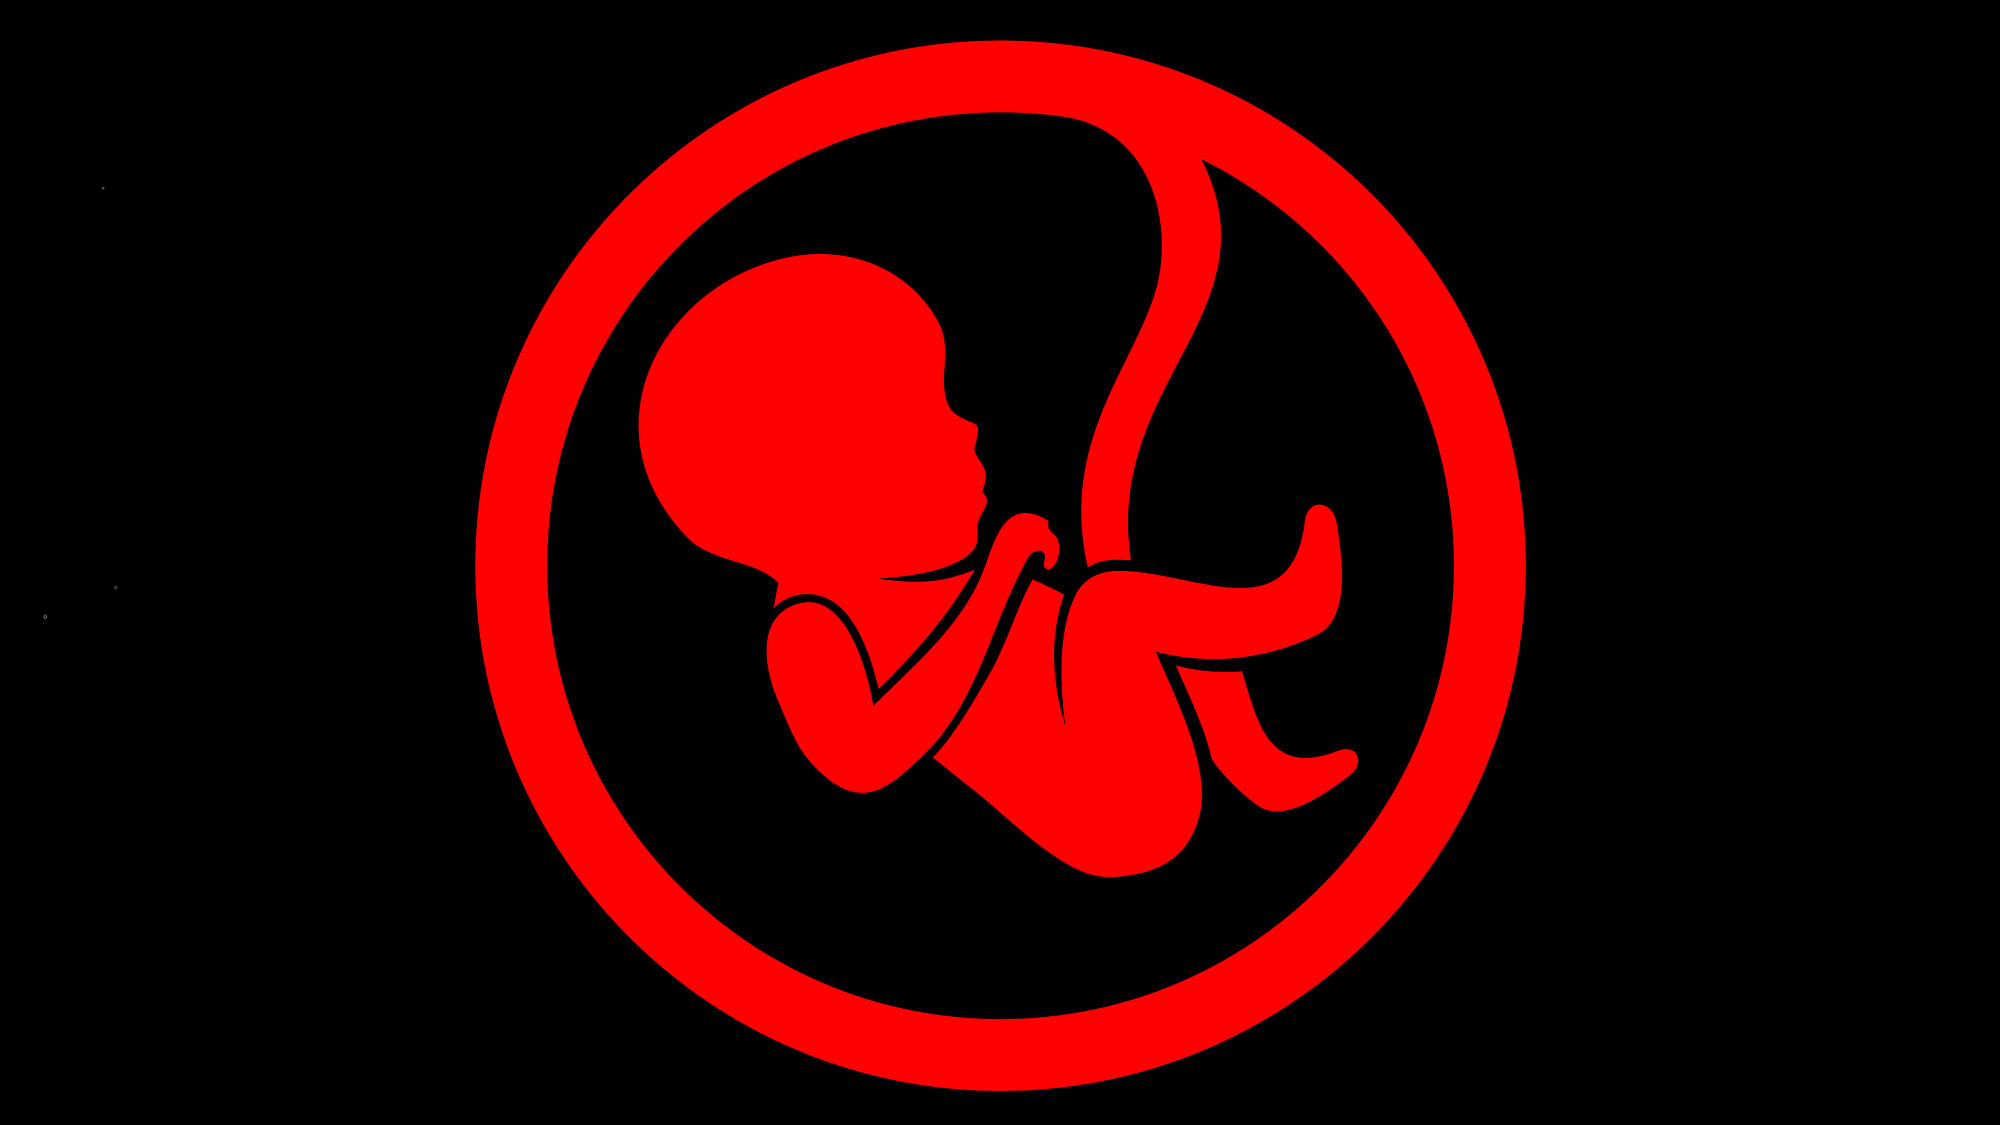 What a mother inhales affects her circulatory system, which is constantly adapting to supply adequate blood flow to the foetus as it grows.